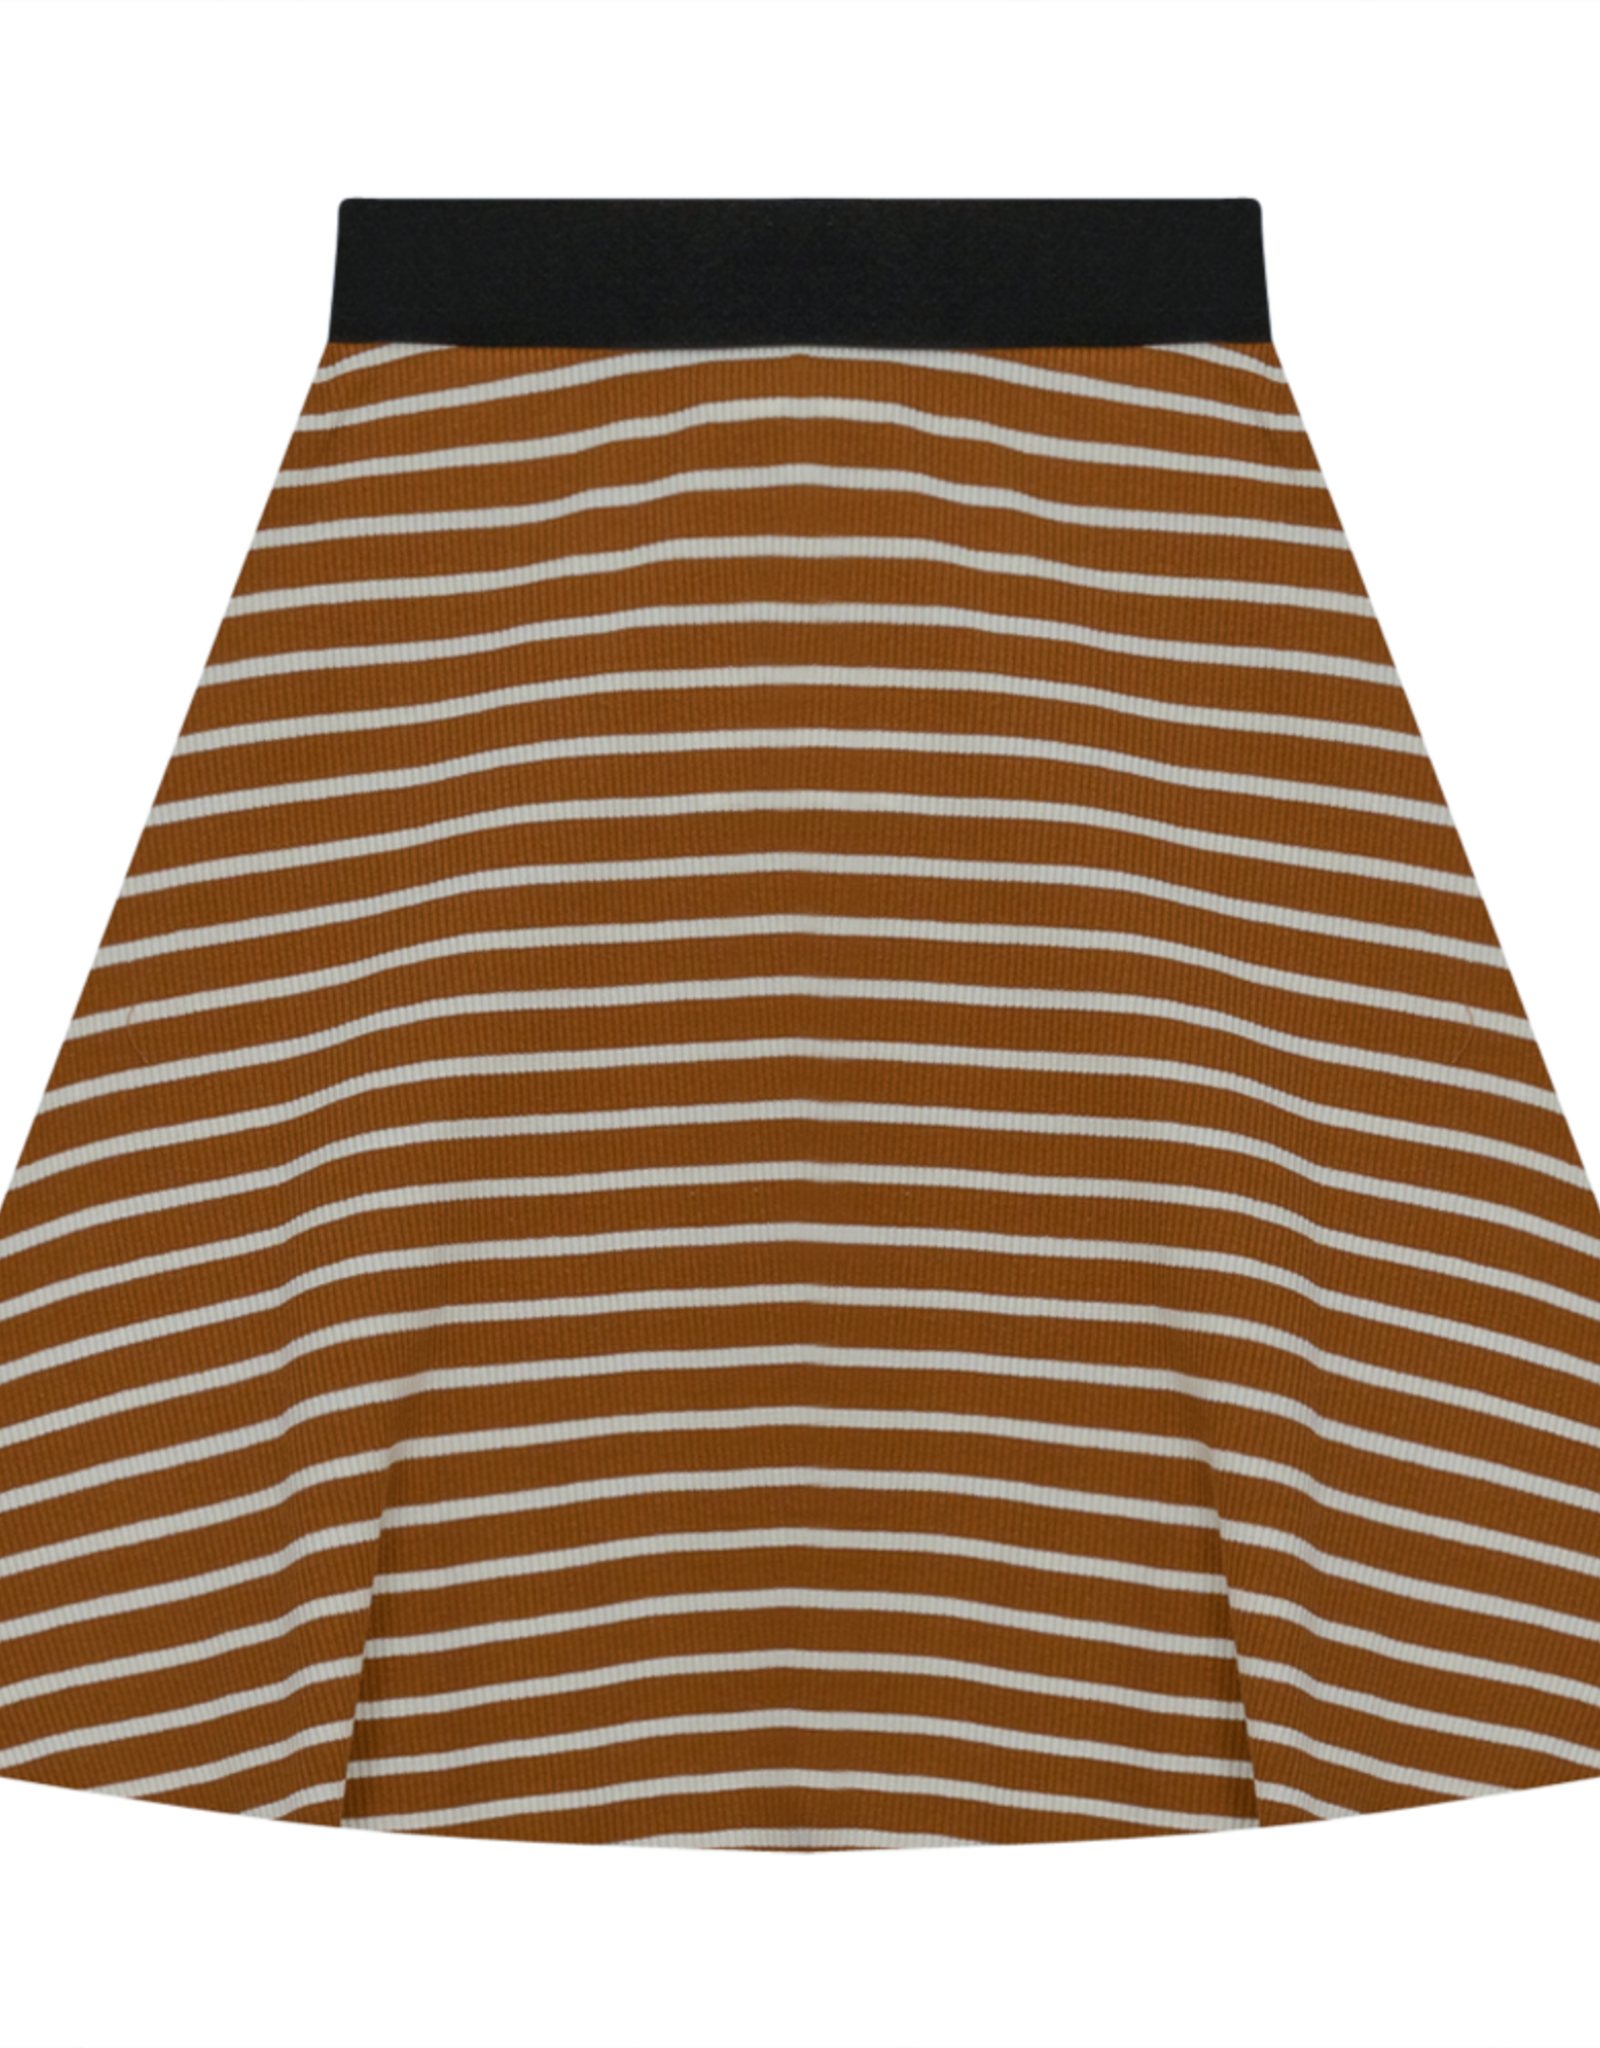 FYI FYI Ribbed Striped Flared Skirt